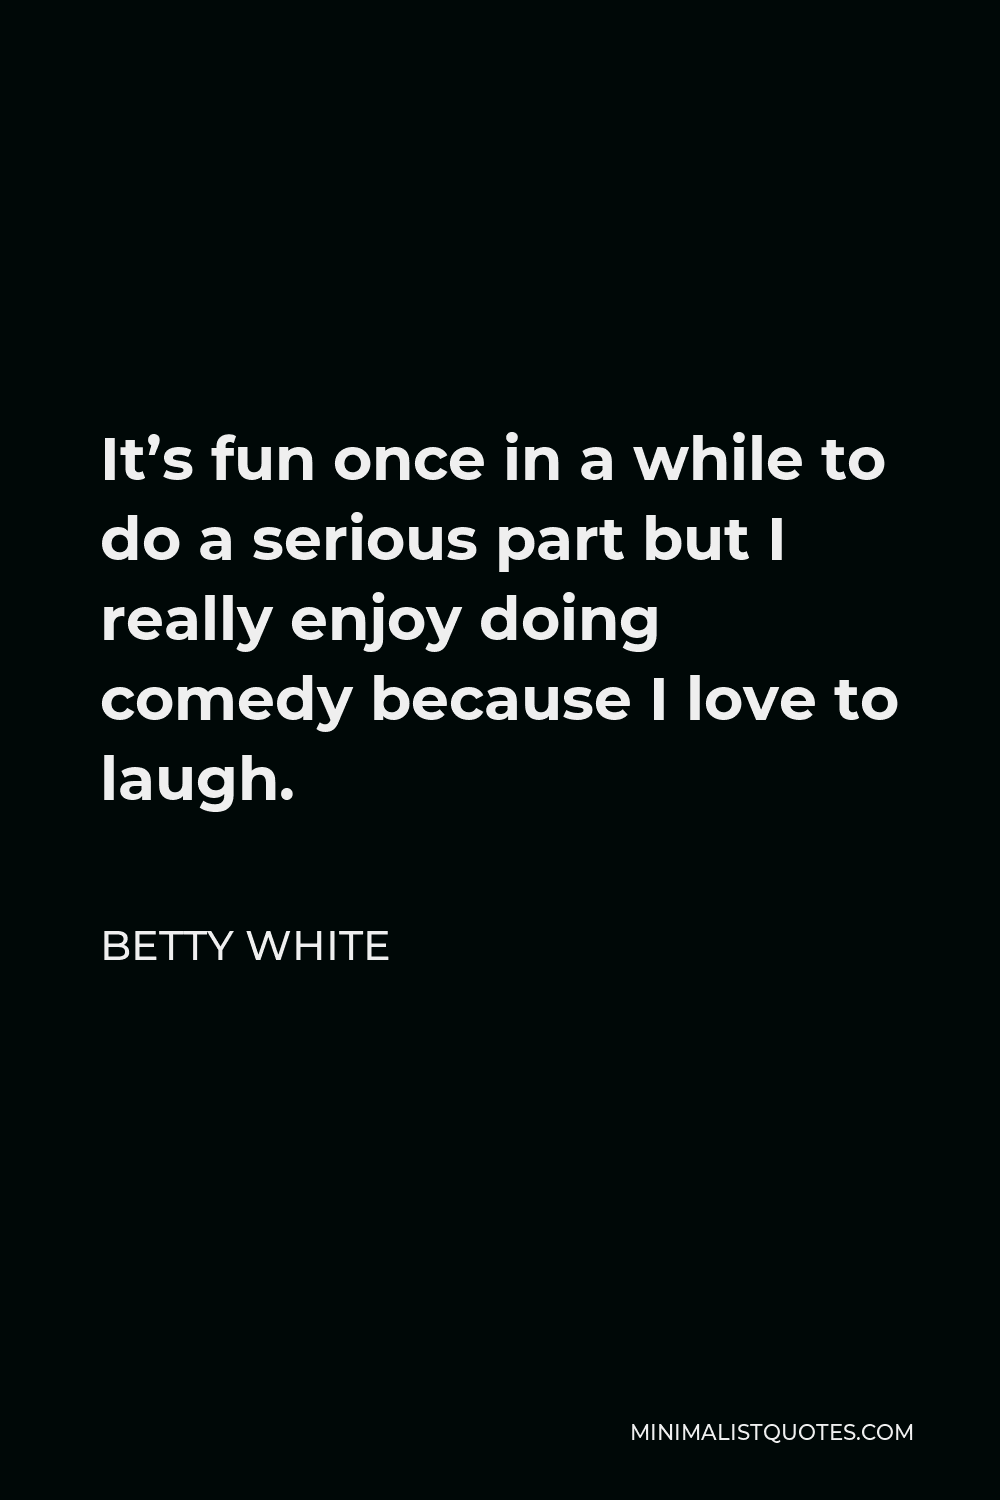 Betty White Quote - It’s fun once in a while to do a serious part but I really enjoy doing comedy because I love to laugh.